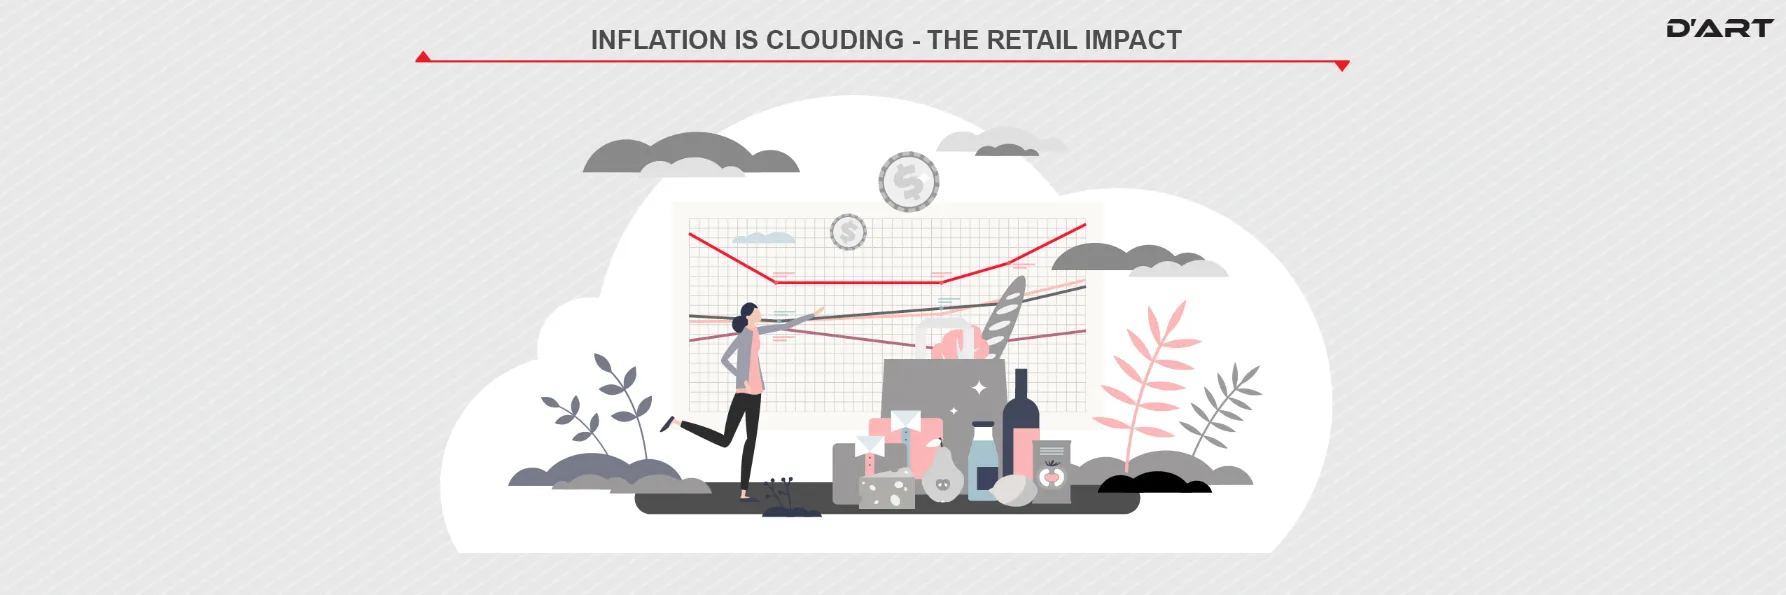 Inflation is clouding -the retail impact